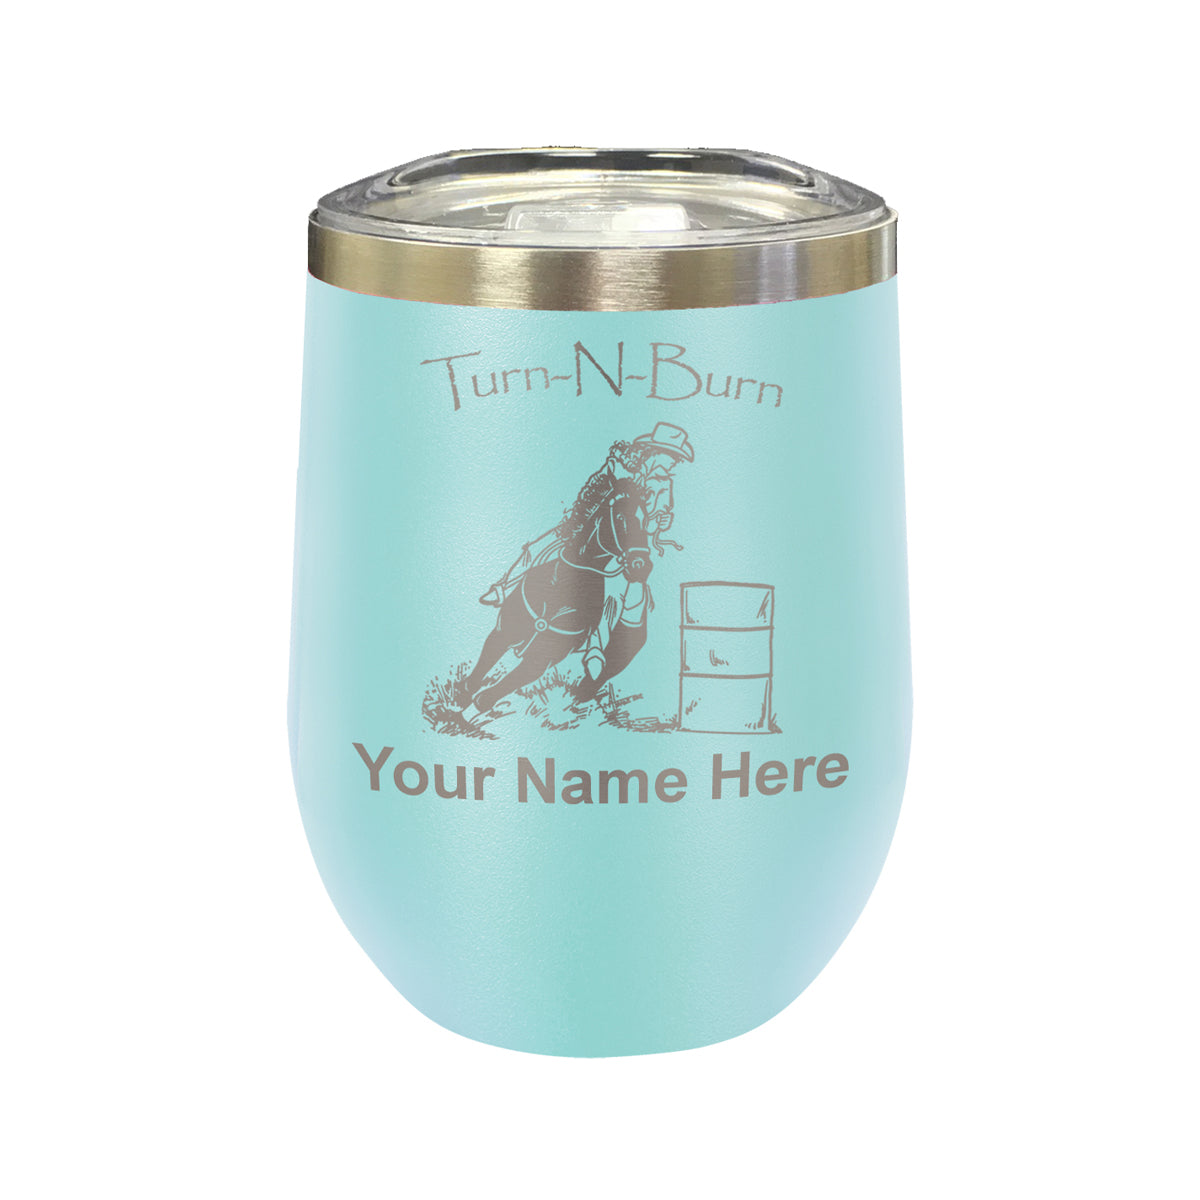 LaserGram Double Wall Stainless Steel Wine Glass, Barrel Racer Turn N Burn, Personalized Engraving Included